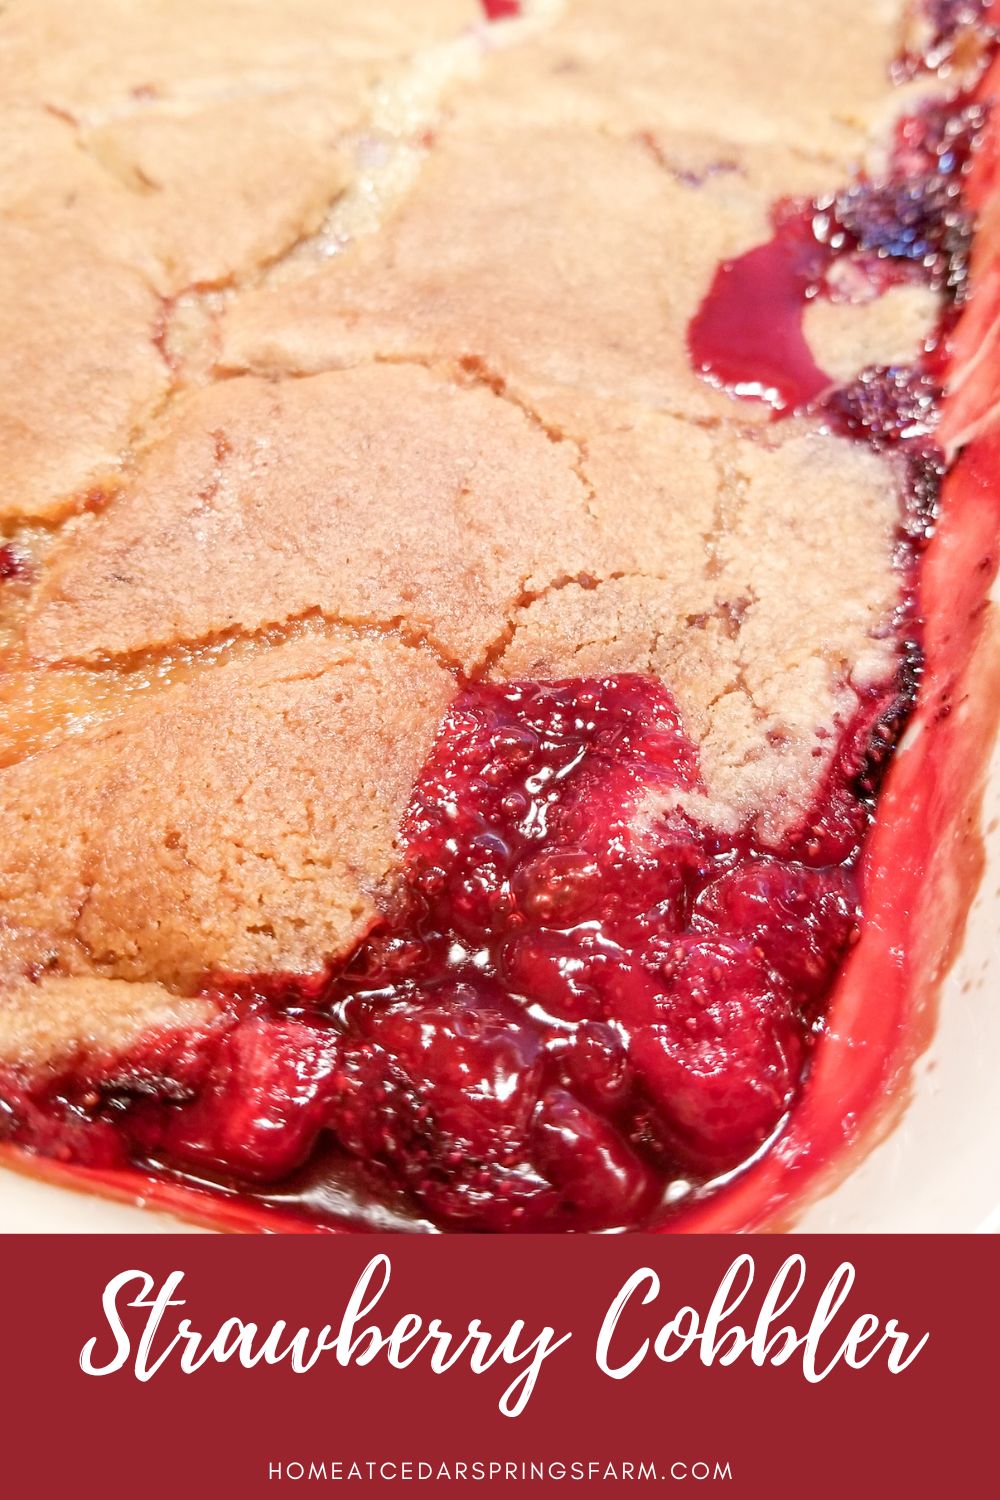 Strawberry Cobbler with text overlay